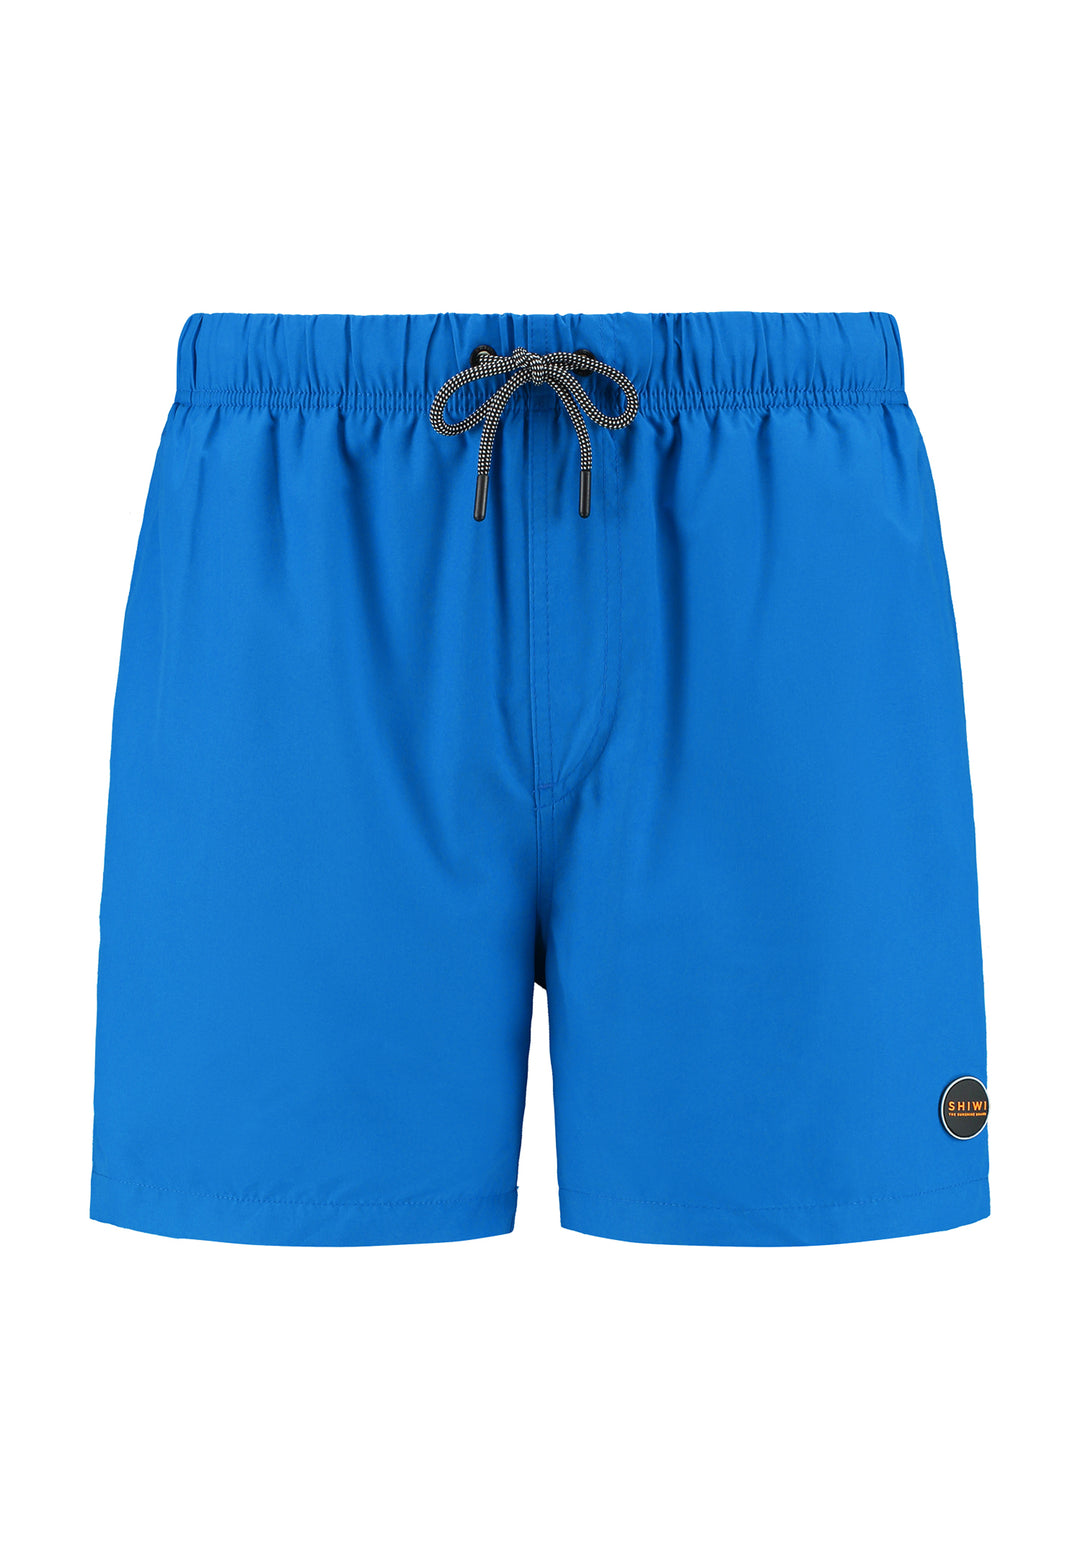 Shiwi Skydive Blue Zwemshort Adult Mike met rekbare tailleband"